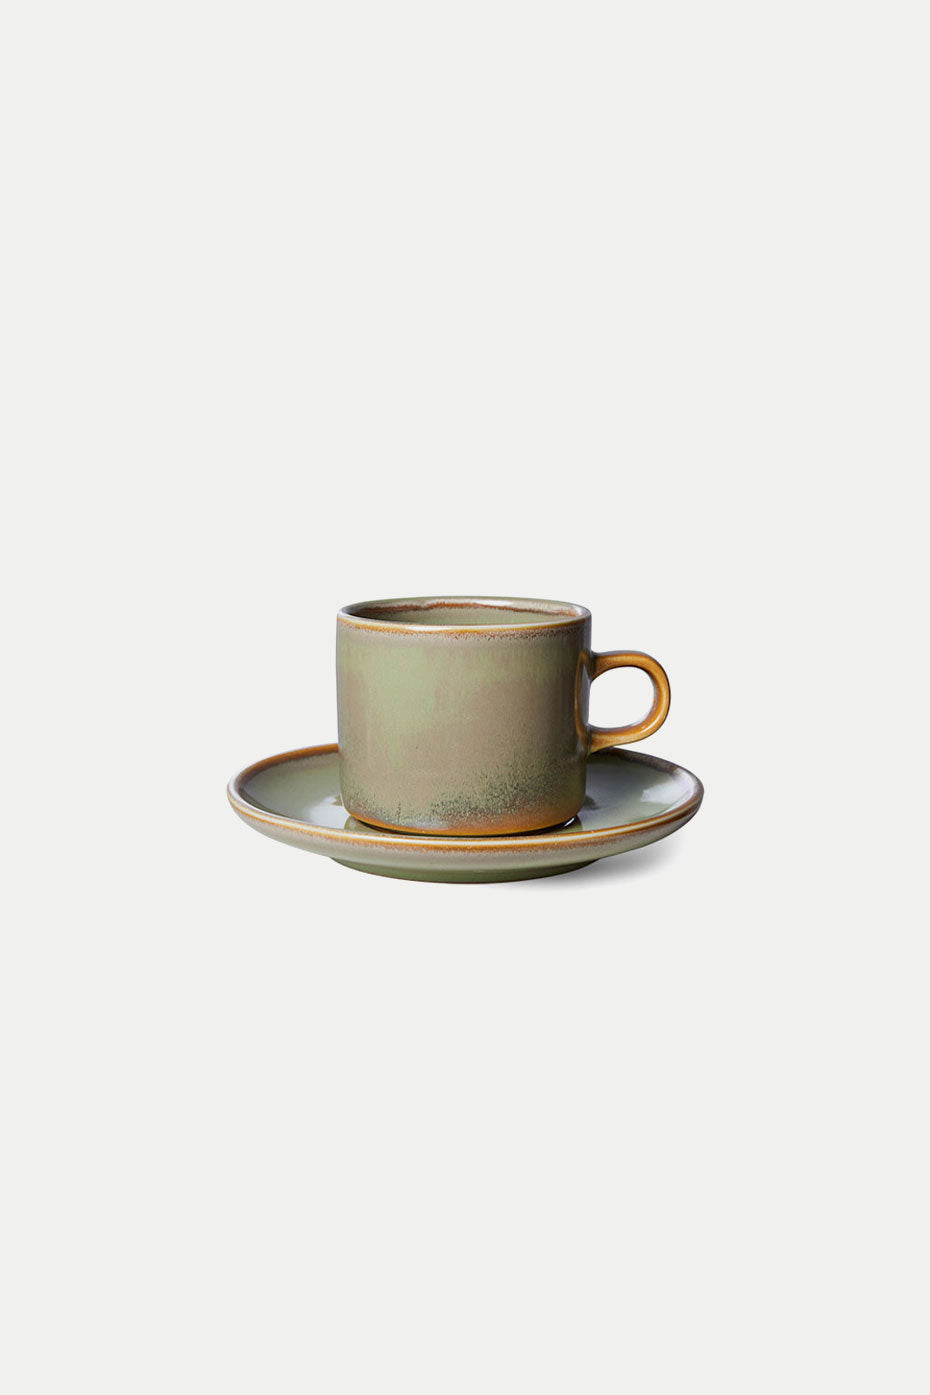 HK Living Moss Green Chef Ceramics Cup And Saucer